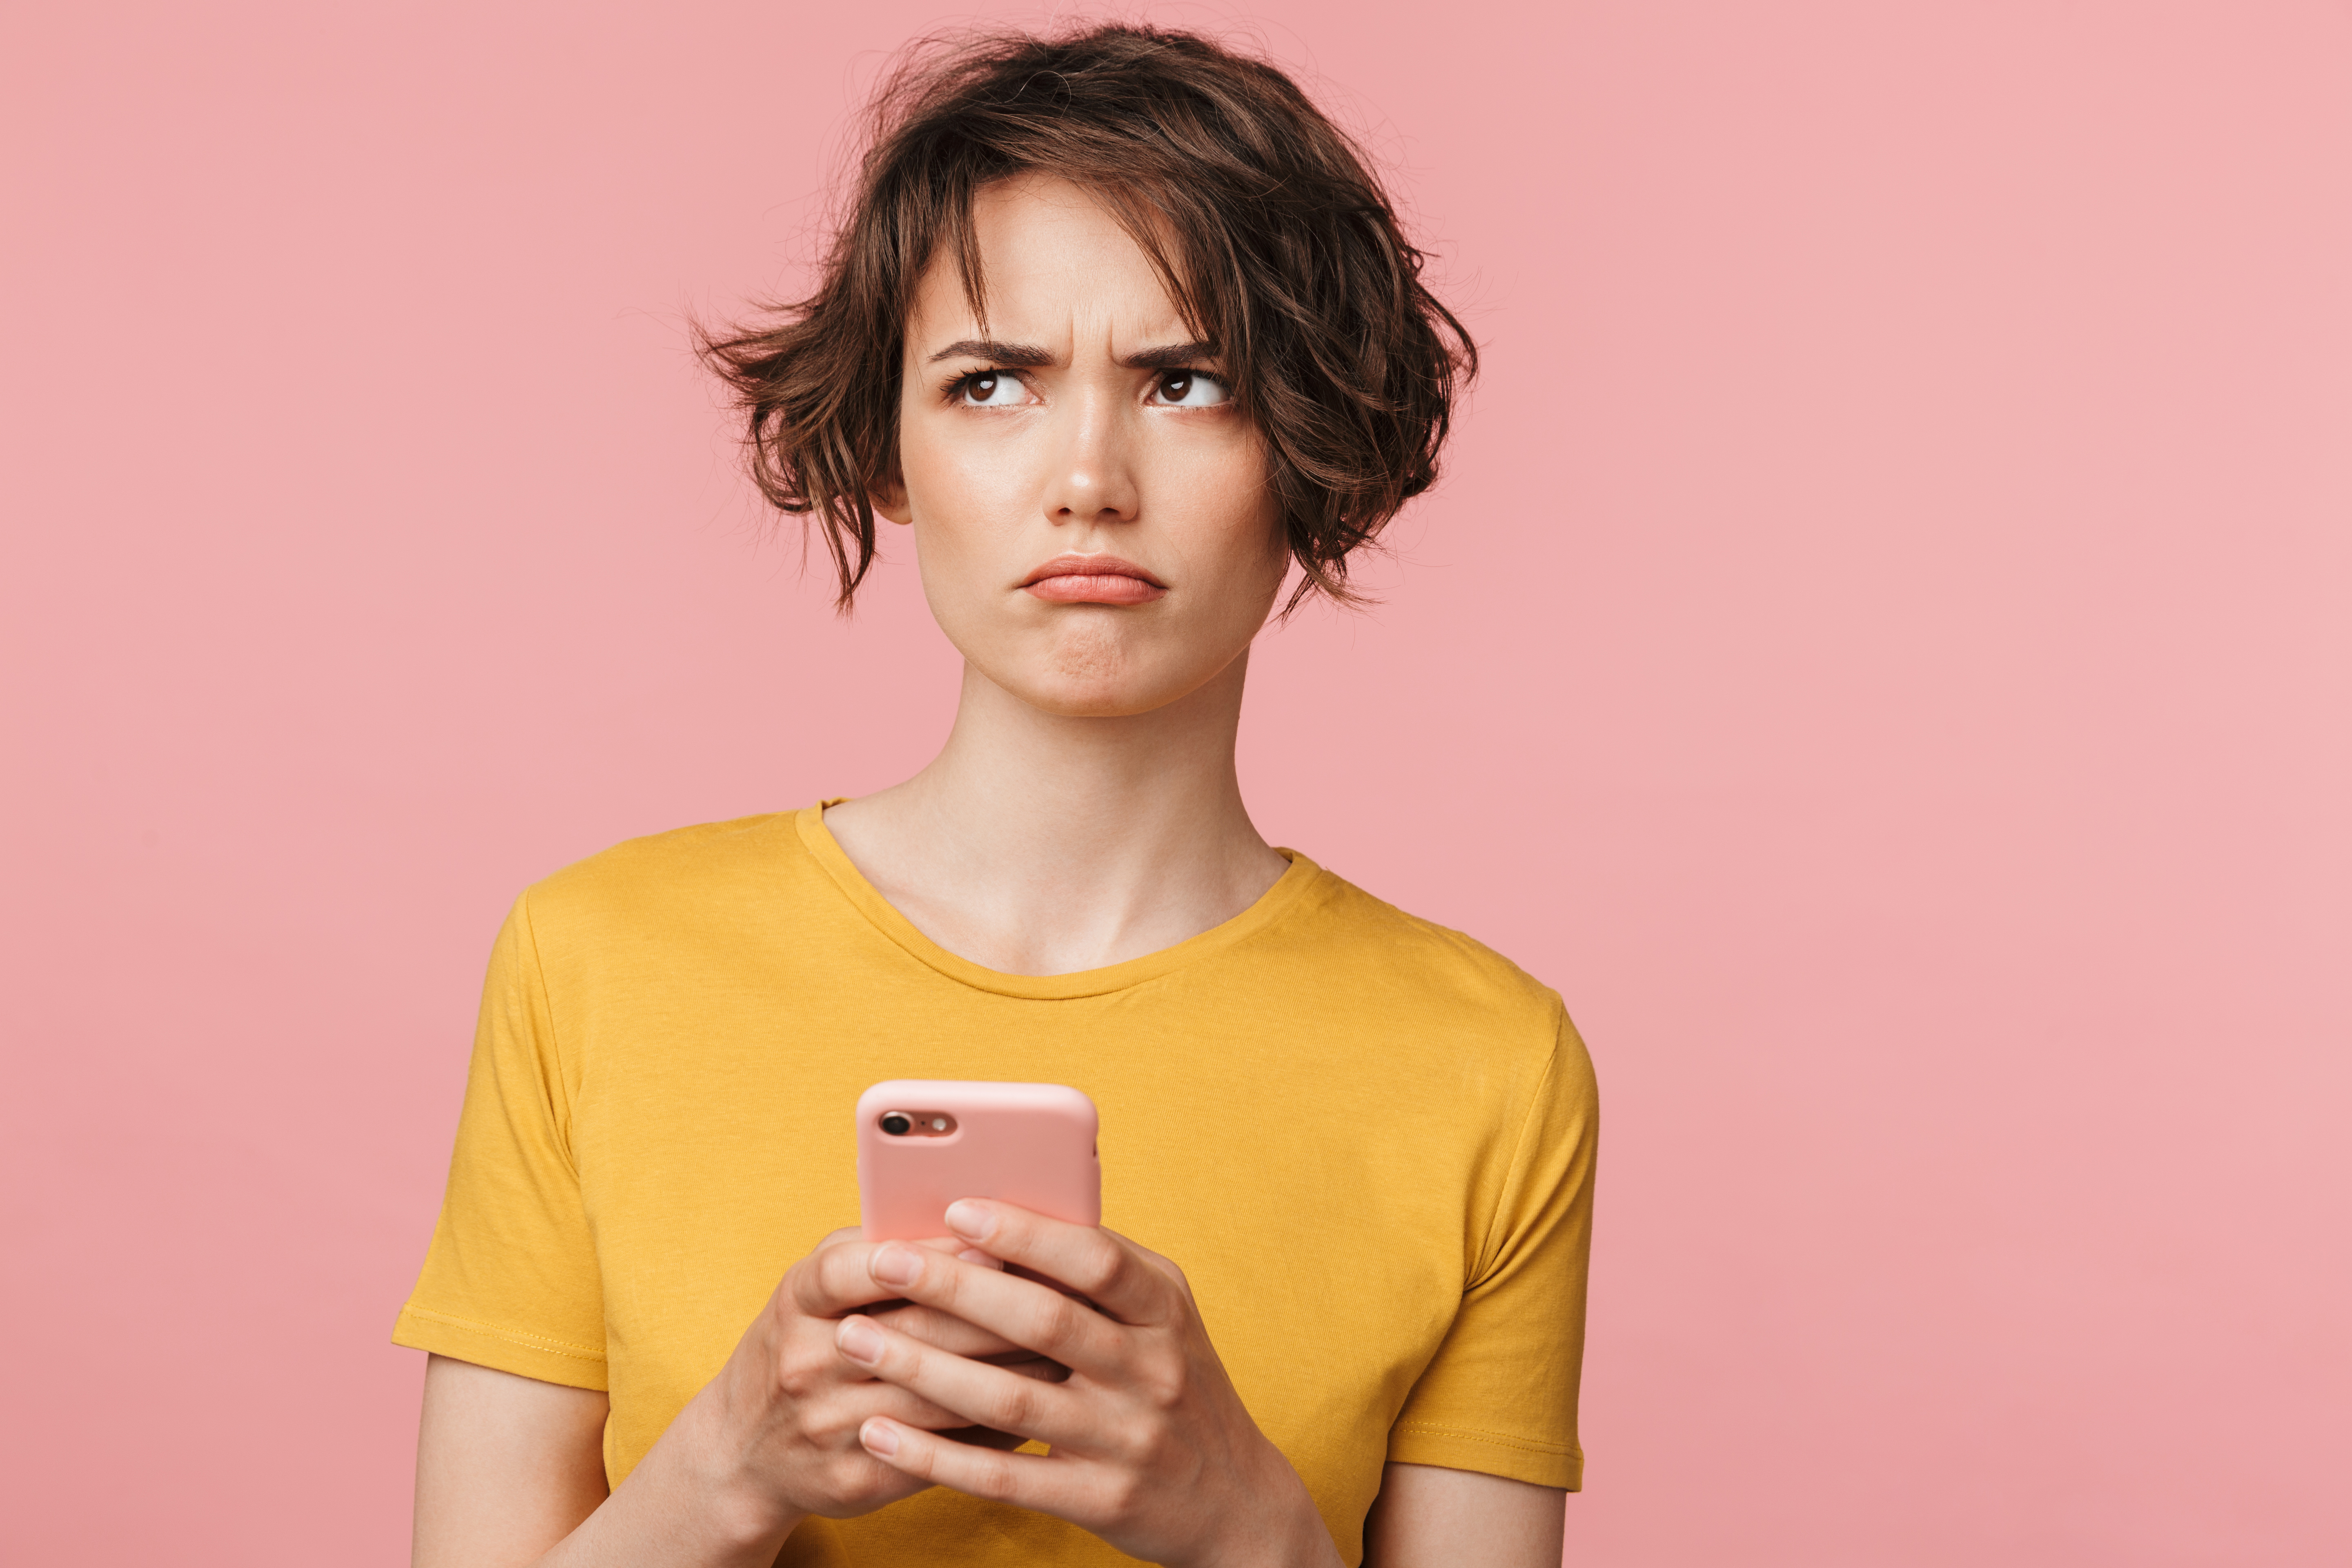 A brown-haired woman in a yellow shirt holding a mobile phone and she is looking to the side with a confused expression